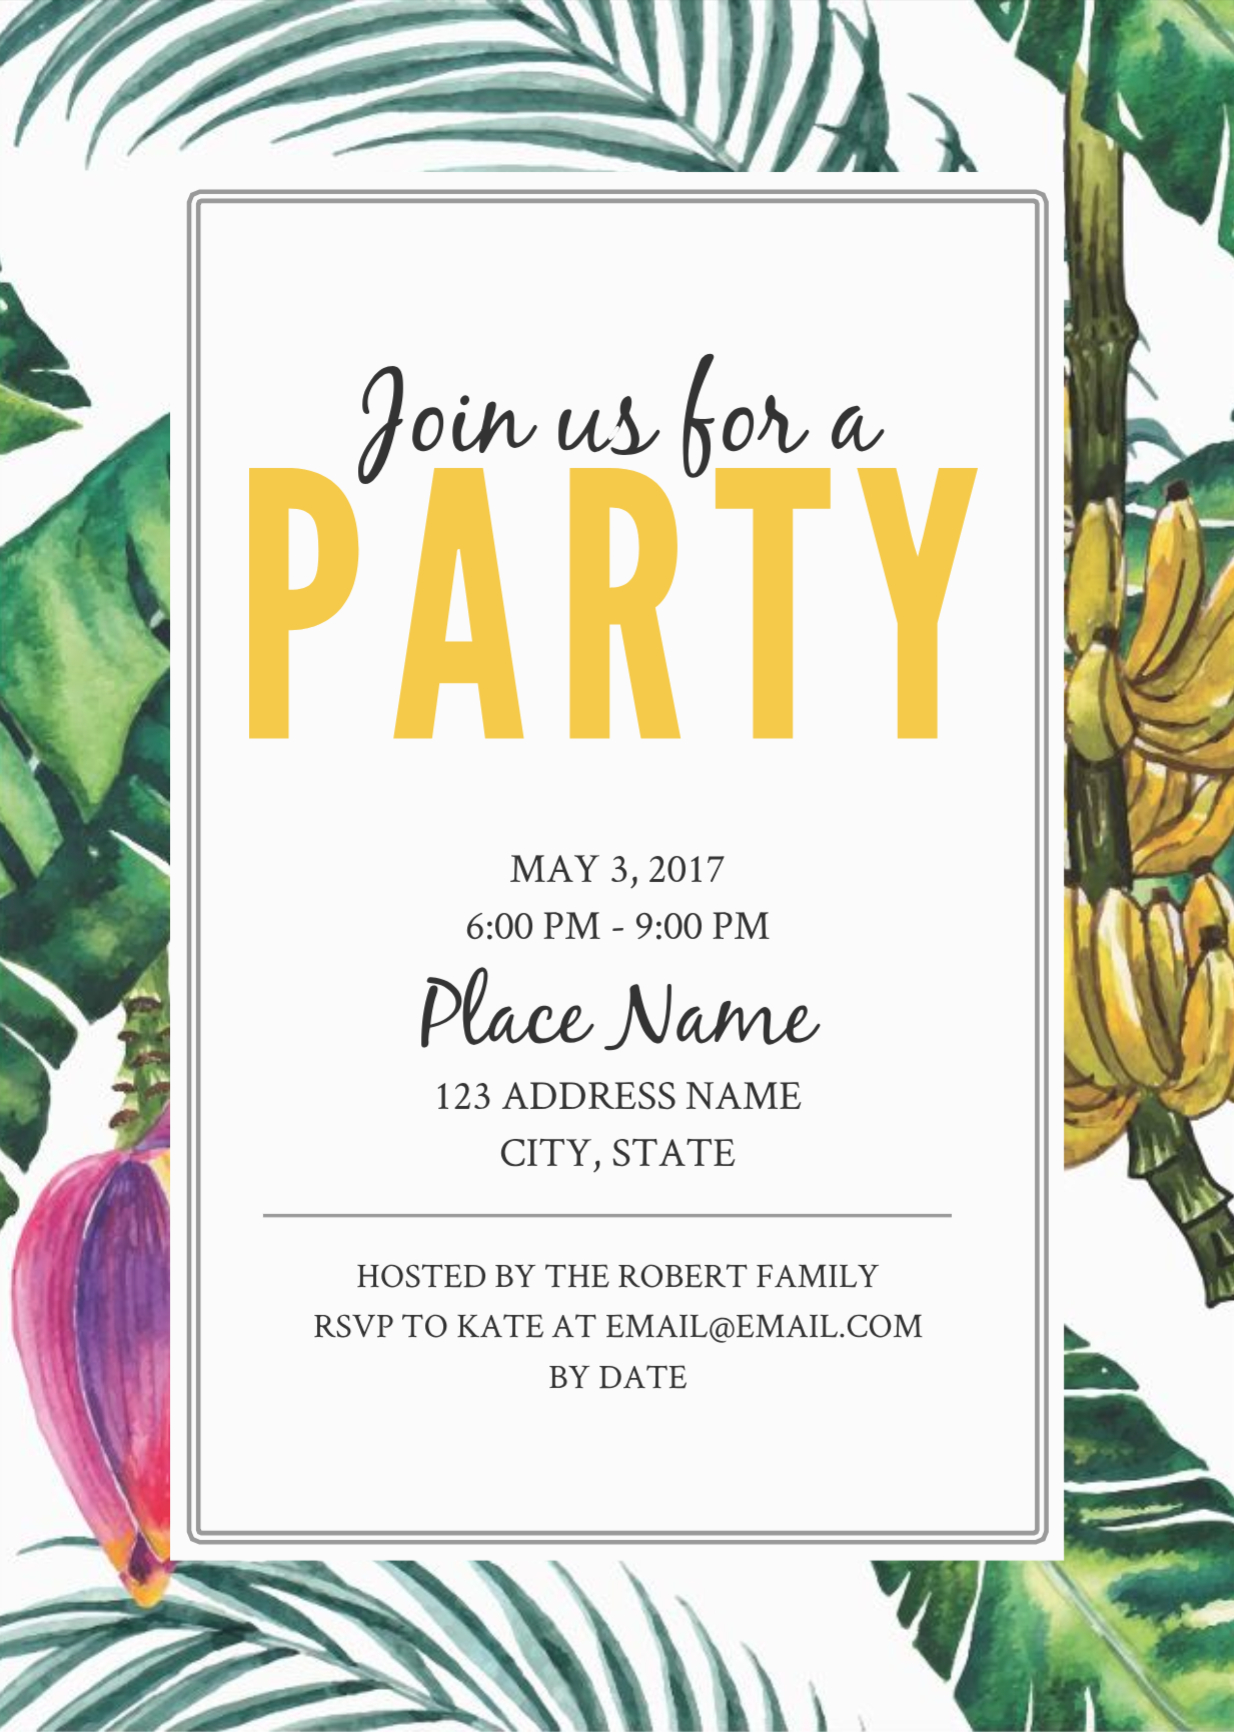 art-party-invitations-art-party-invitations-birthday-party